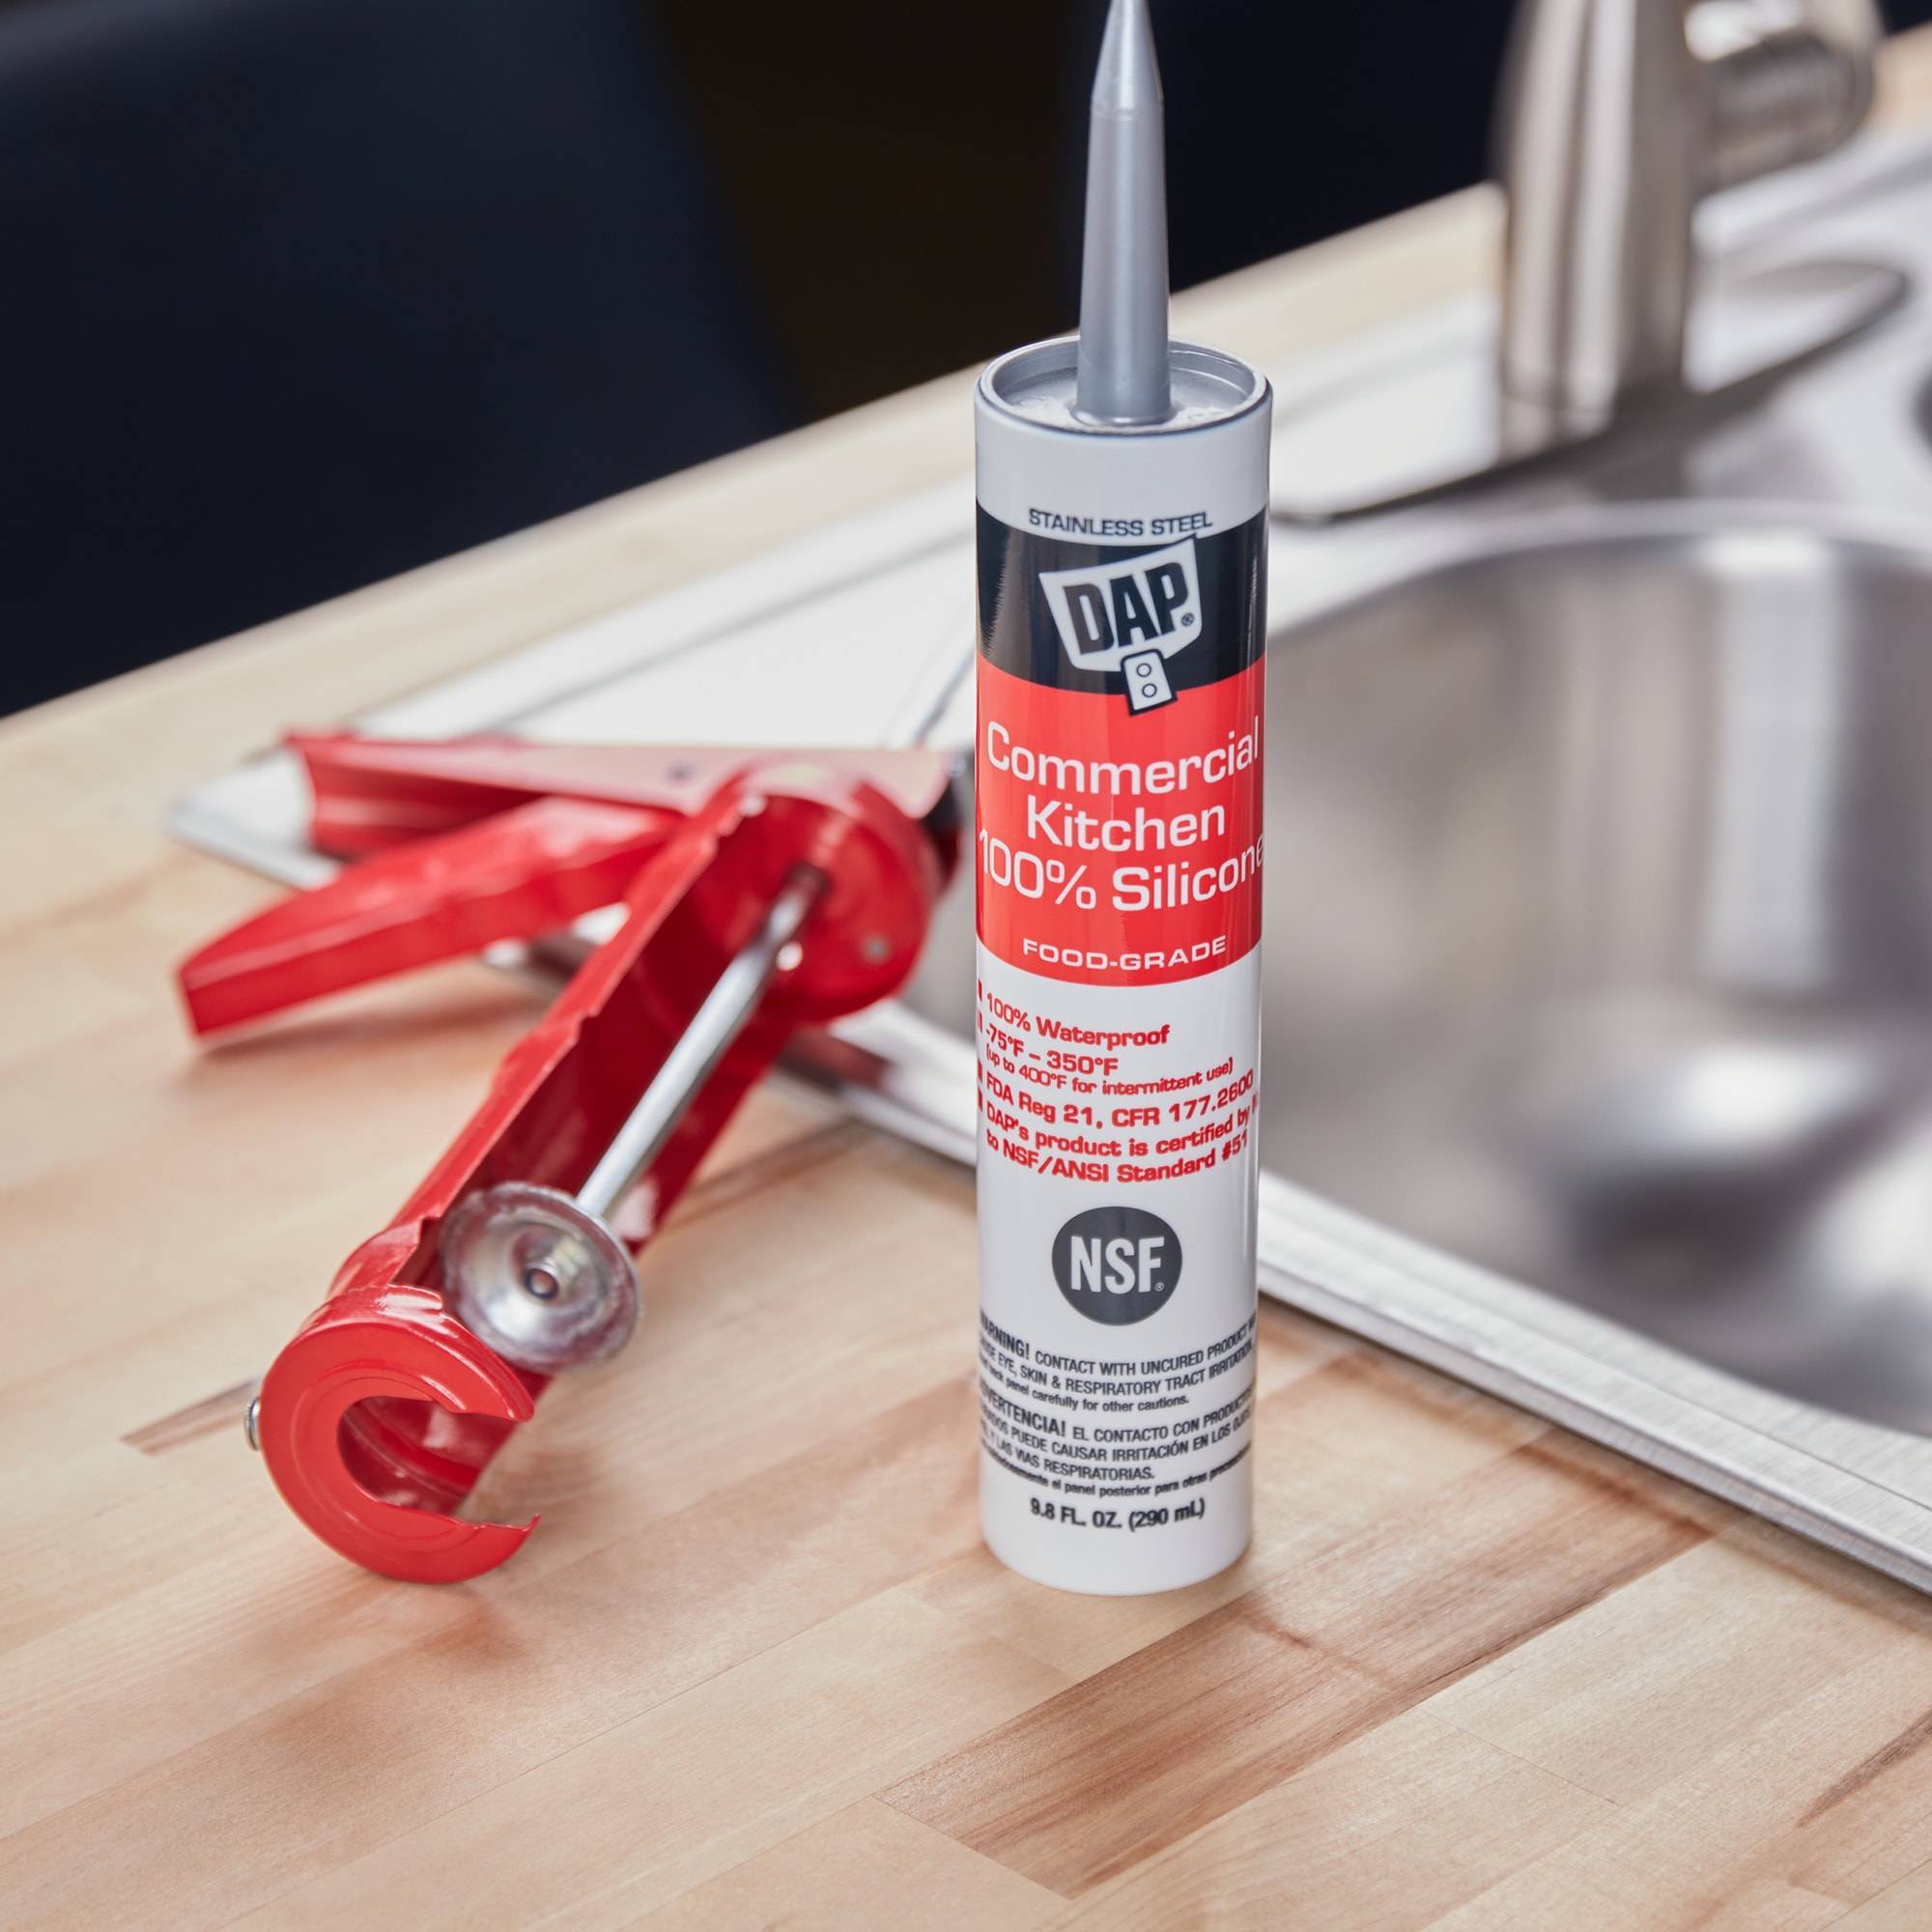 DAP Commercial Kitchen 9.8-oz Clear Silicone Caulk in the Caulk department  at